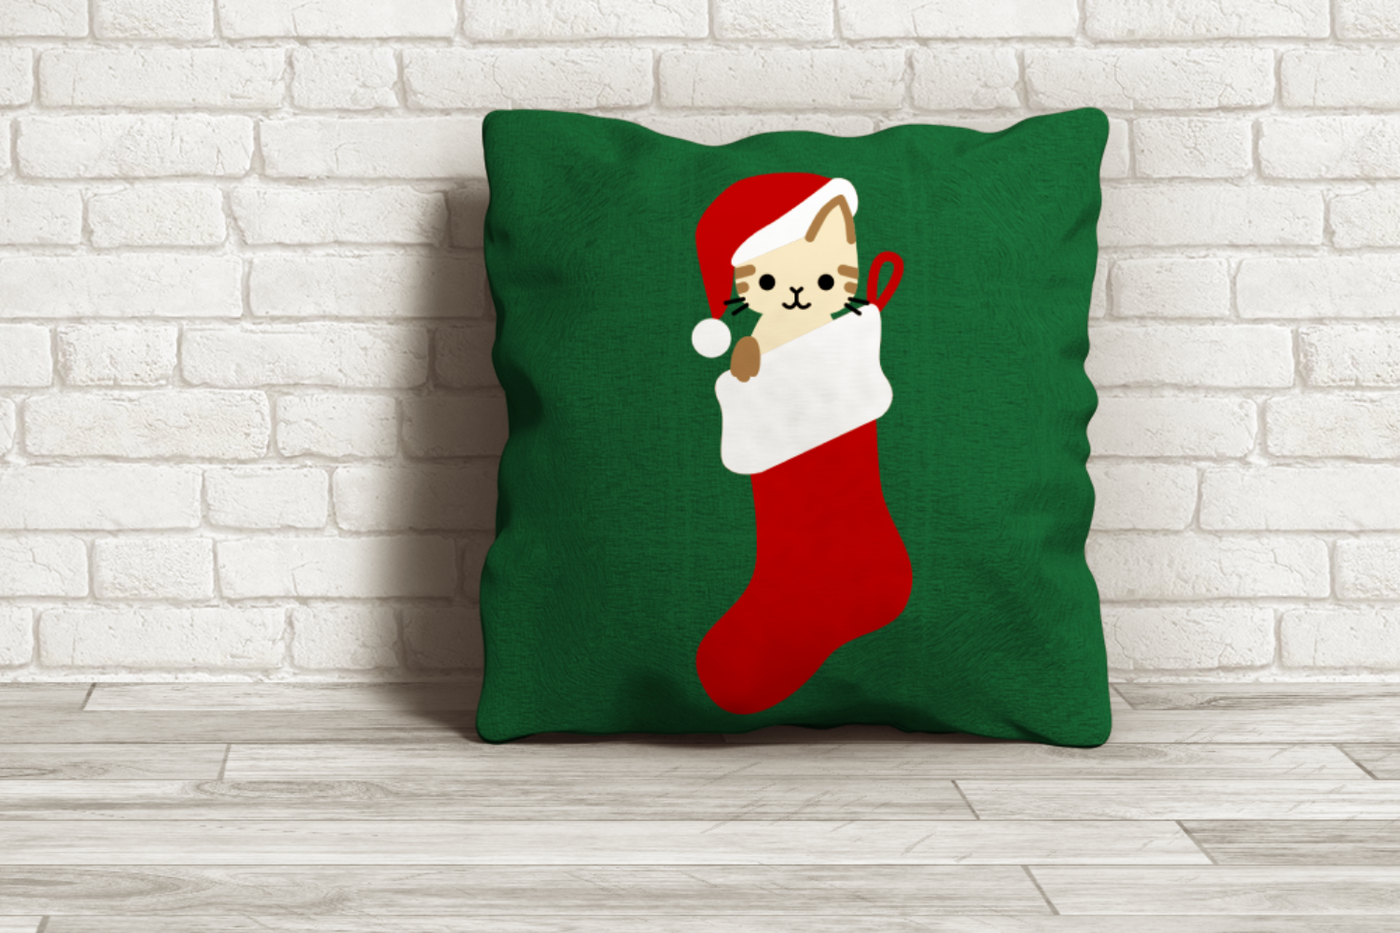 A green throw pillow on the floor in front of a white brick wall. The pillow has a design featuring a kitten in a stocking wearing a Santa hat.